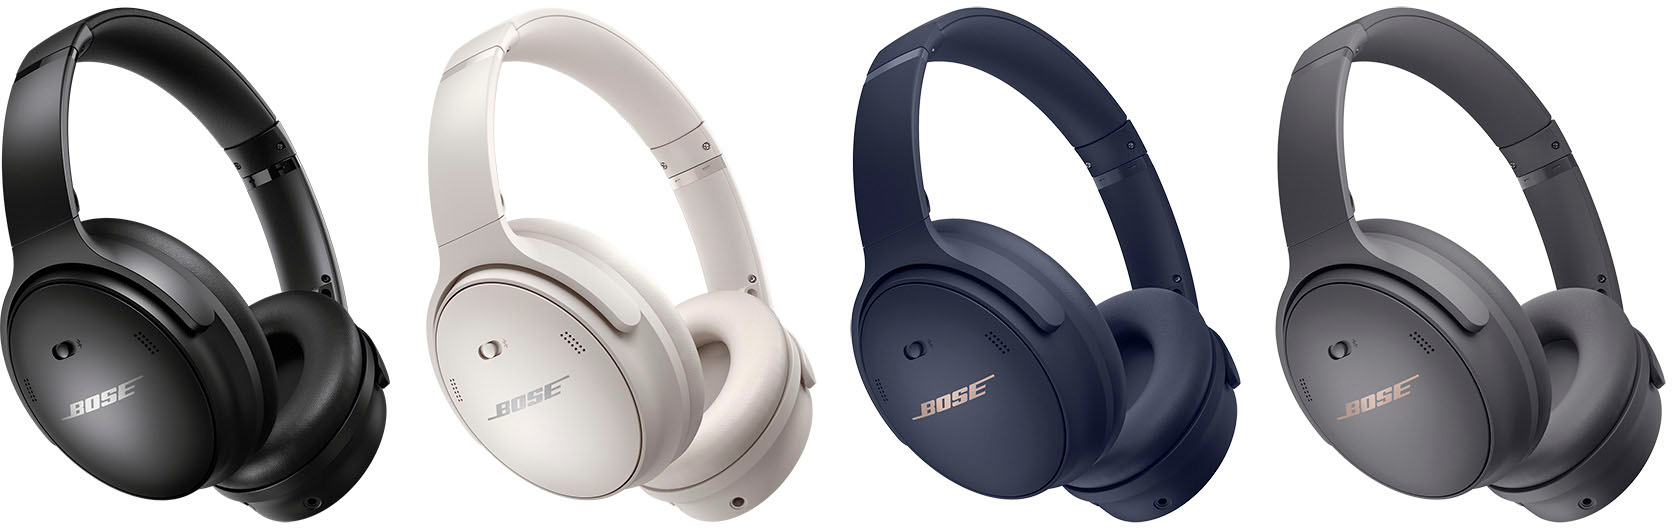 Bose QuietComfort 45 Wireless Noise Cancelling Over-the-Ear Headphones  Midnight Blue 866724-0300 - Best Buy